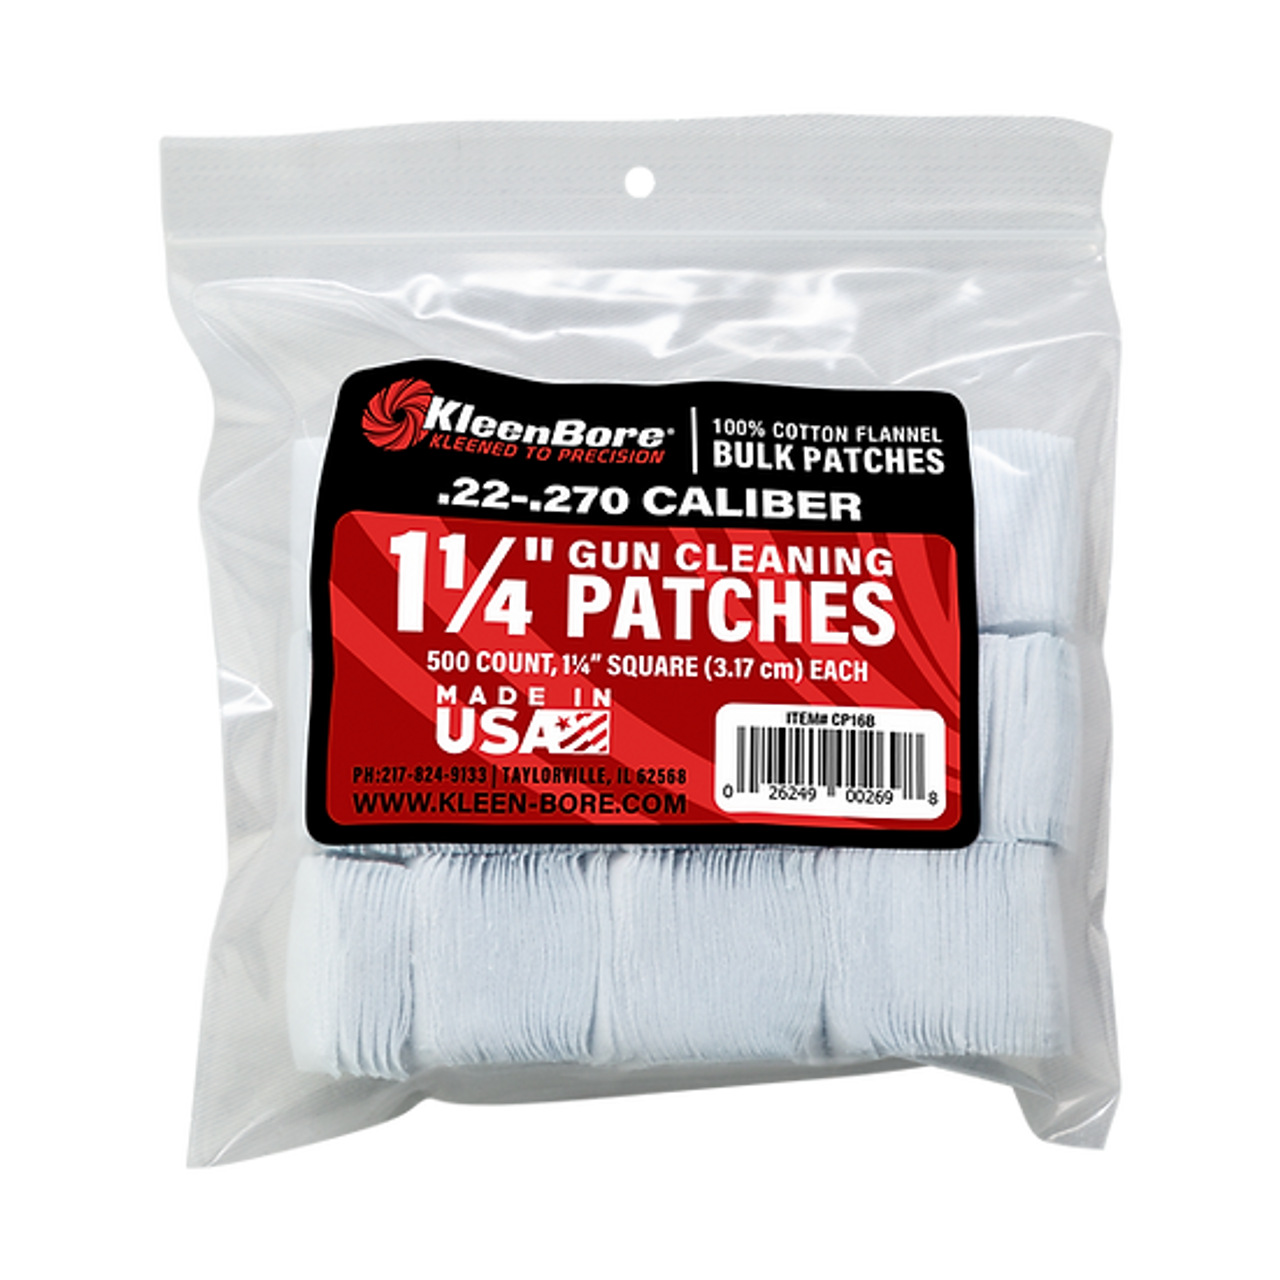 KleenBore 1-1/4" .22-.270 Cal Cleaning Patches, 500 Pack